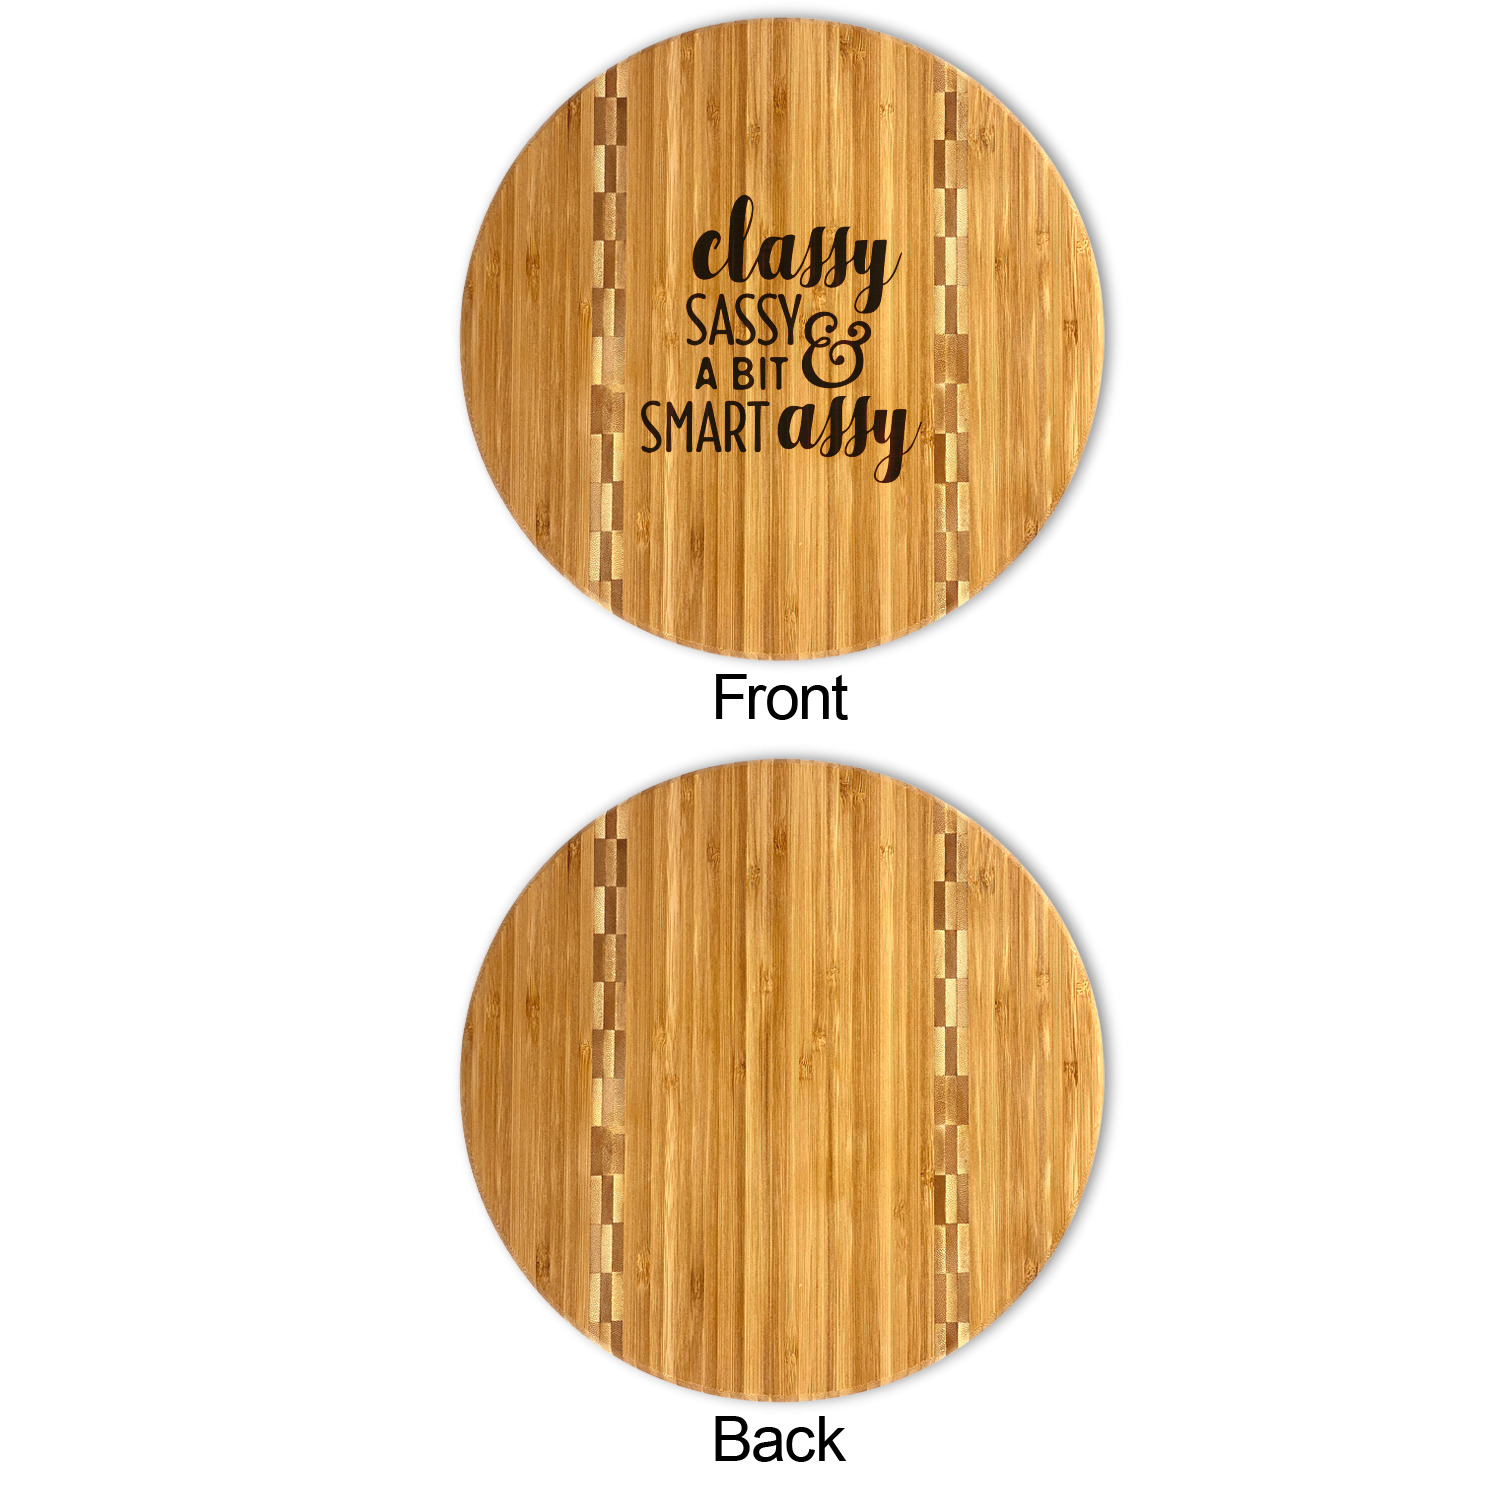 https://www.youcustomizeit.com/common/MAKE/837472/Sassy-Quotes-Bamboo-Cutting-Boards-APPROVAL.jpg?lm=1658265580